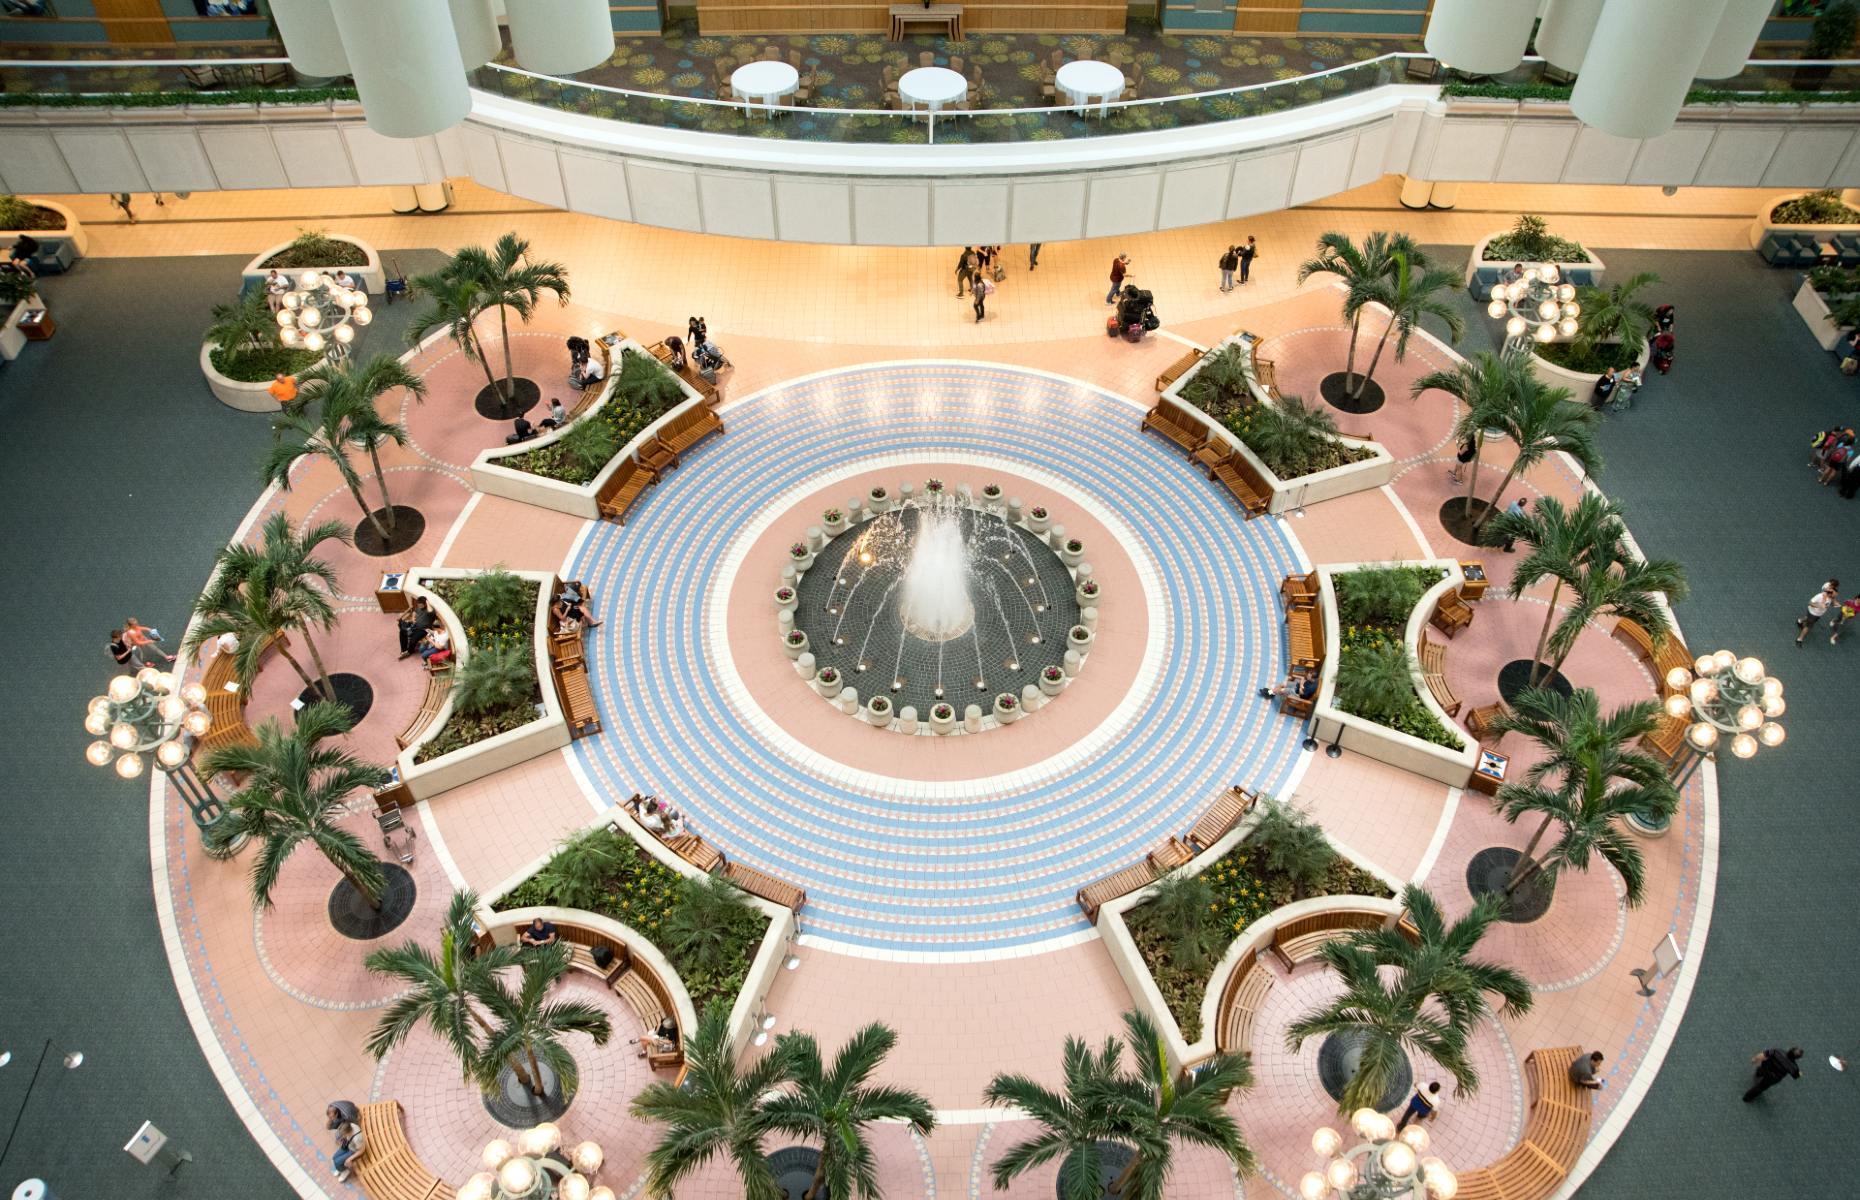 <p>Expect light and airy interiors, 35-foot-tall (11m) synthetic palm trees and Art Deco-style touches in <a href="https://orlandoairports.net/">this modern airport</a>, located six miles (10km) from downtown Orlando. A former military hub, it's continued to grow since 1981, when the first commercial terminals opened, and <a href="https://www.internationalairportreview.com/airports/68589/orlando-international-airport-mco/">surpassed Miami International Airport as the state’s busiest in 2017</a>. Today, it runs direct flights to 98 US destinations and 48 international destinations, plus, it was among the highest-scoring Mega Airports in <a href="https://www.jdpower.com/business/press-releases/2021-north-america-airport-satisfaction-study">J.D. Power’s 2021 Airport Satisfaction Index</a>.</p>